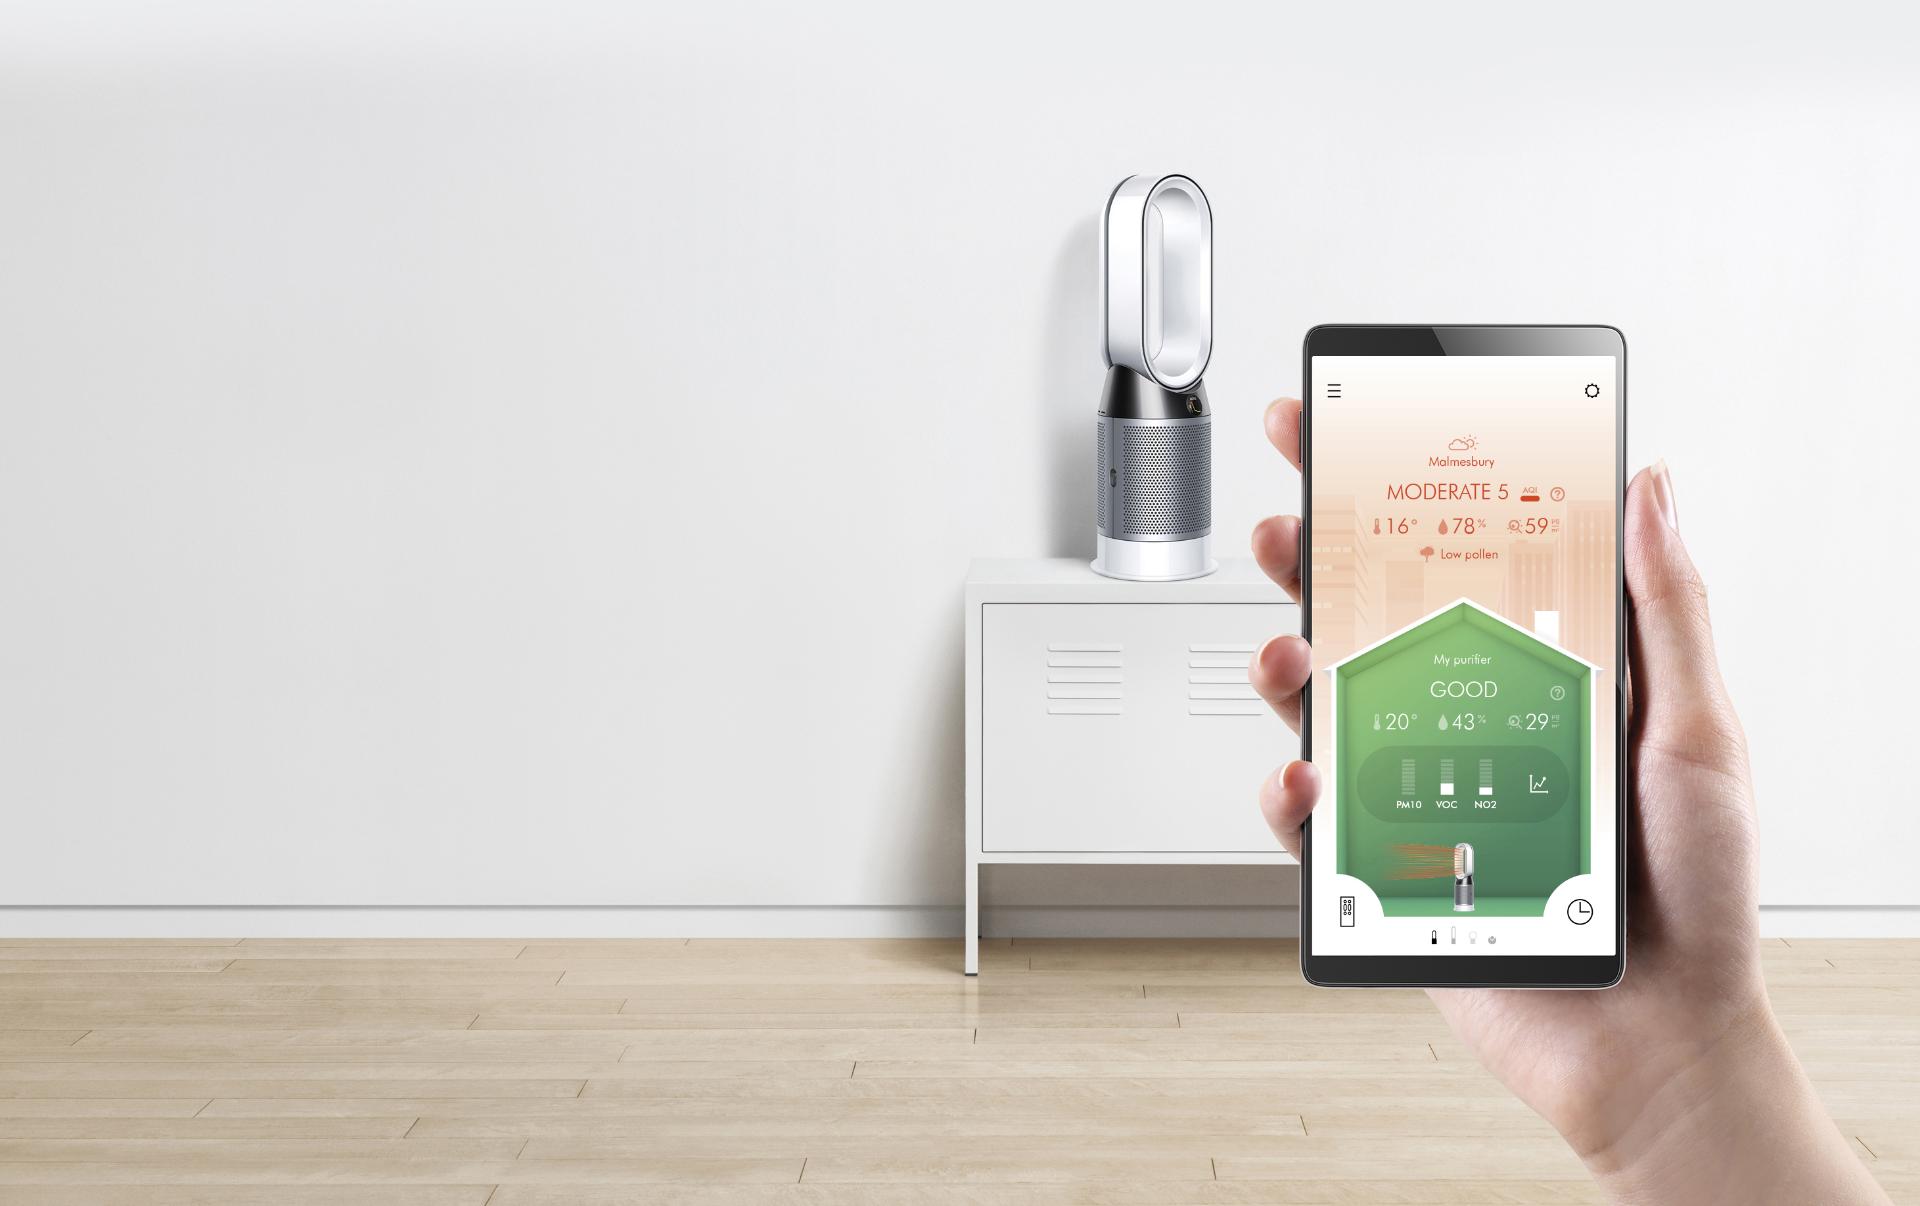 Remotely control Dyson air purifiers and monitor indoor air quality with Dyson Link App